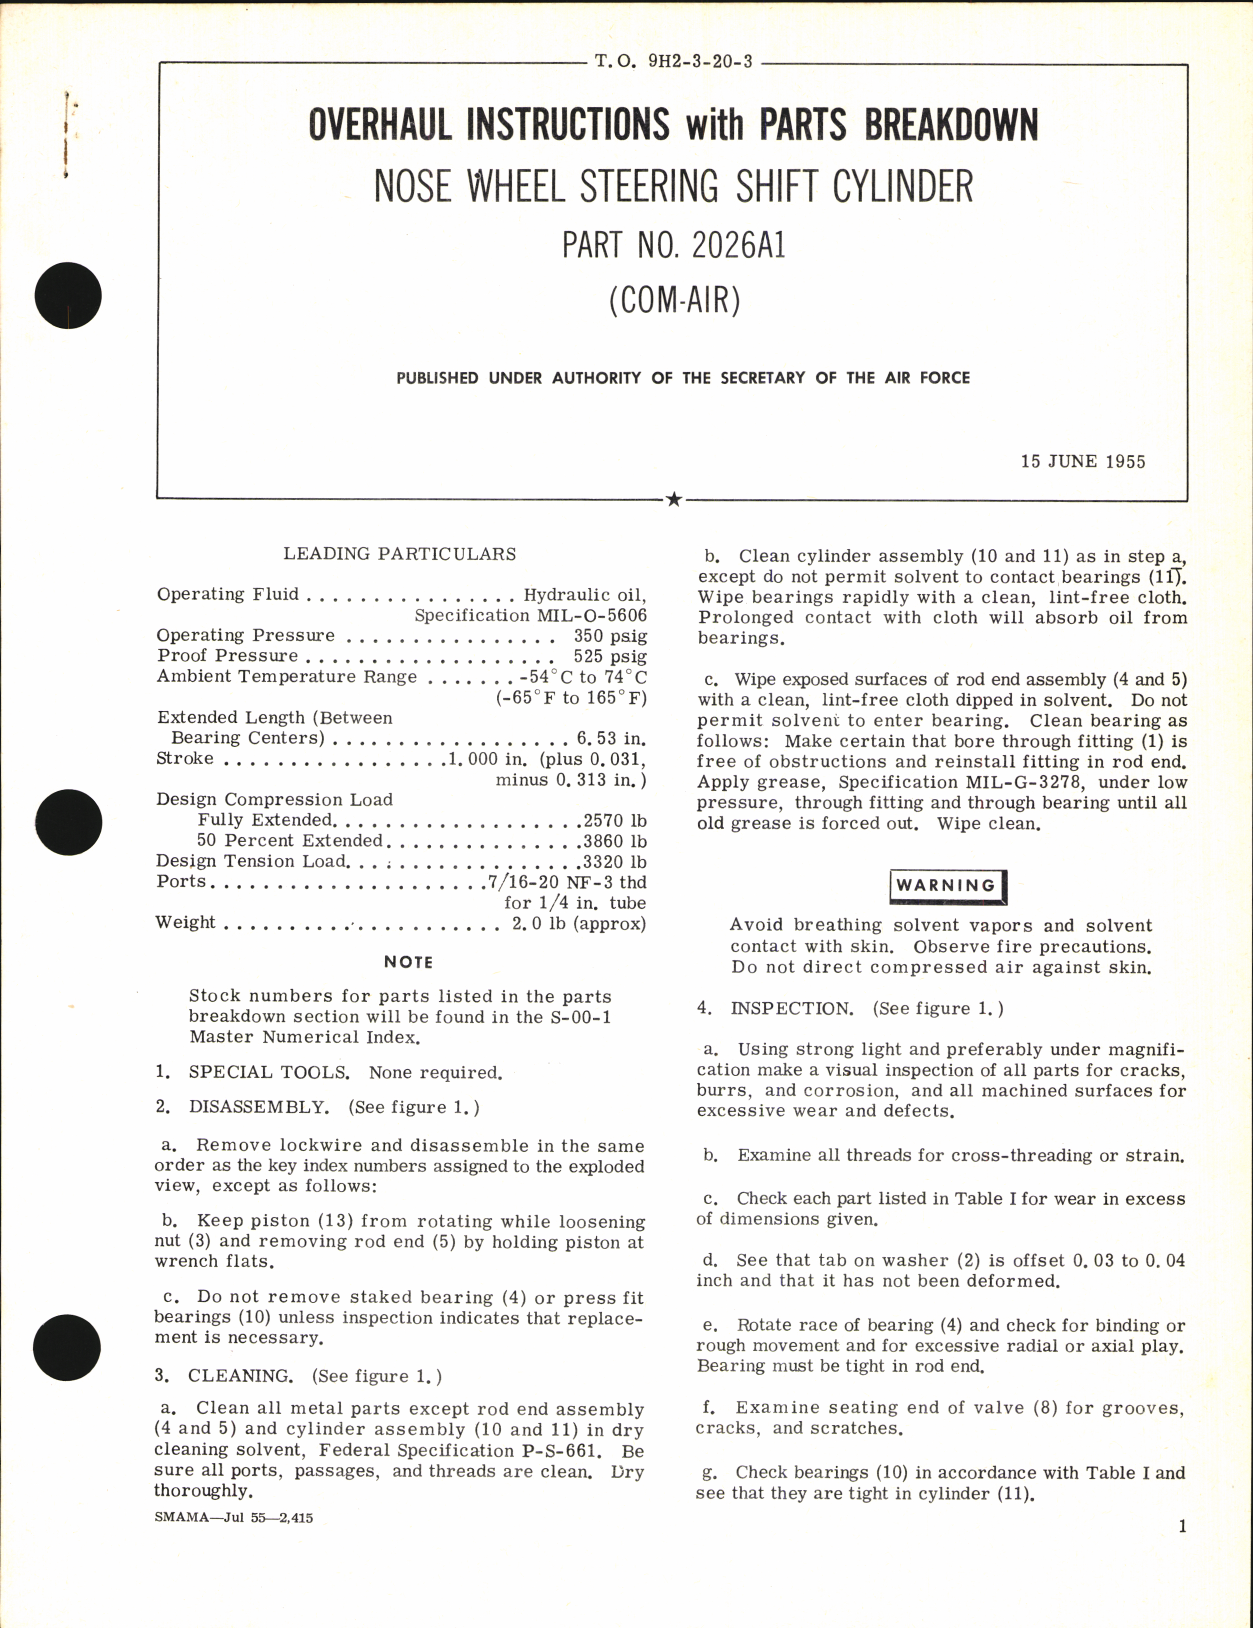 Sample page 1 from AirCorps Library document: Overhaul Instructions with Parts Breakdown for Nose Wheel Steering Shift Cylinder Part No. 2026A1